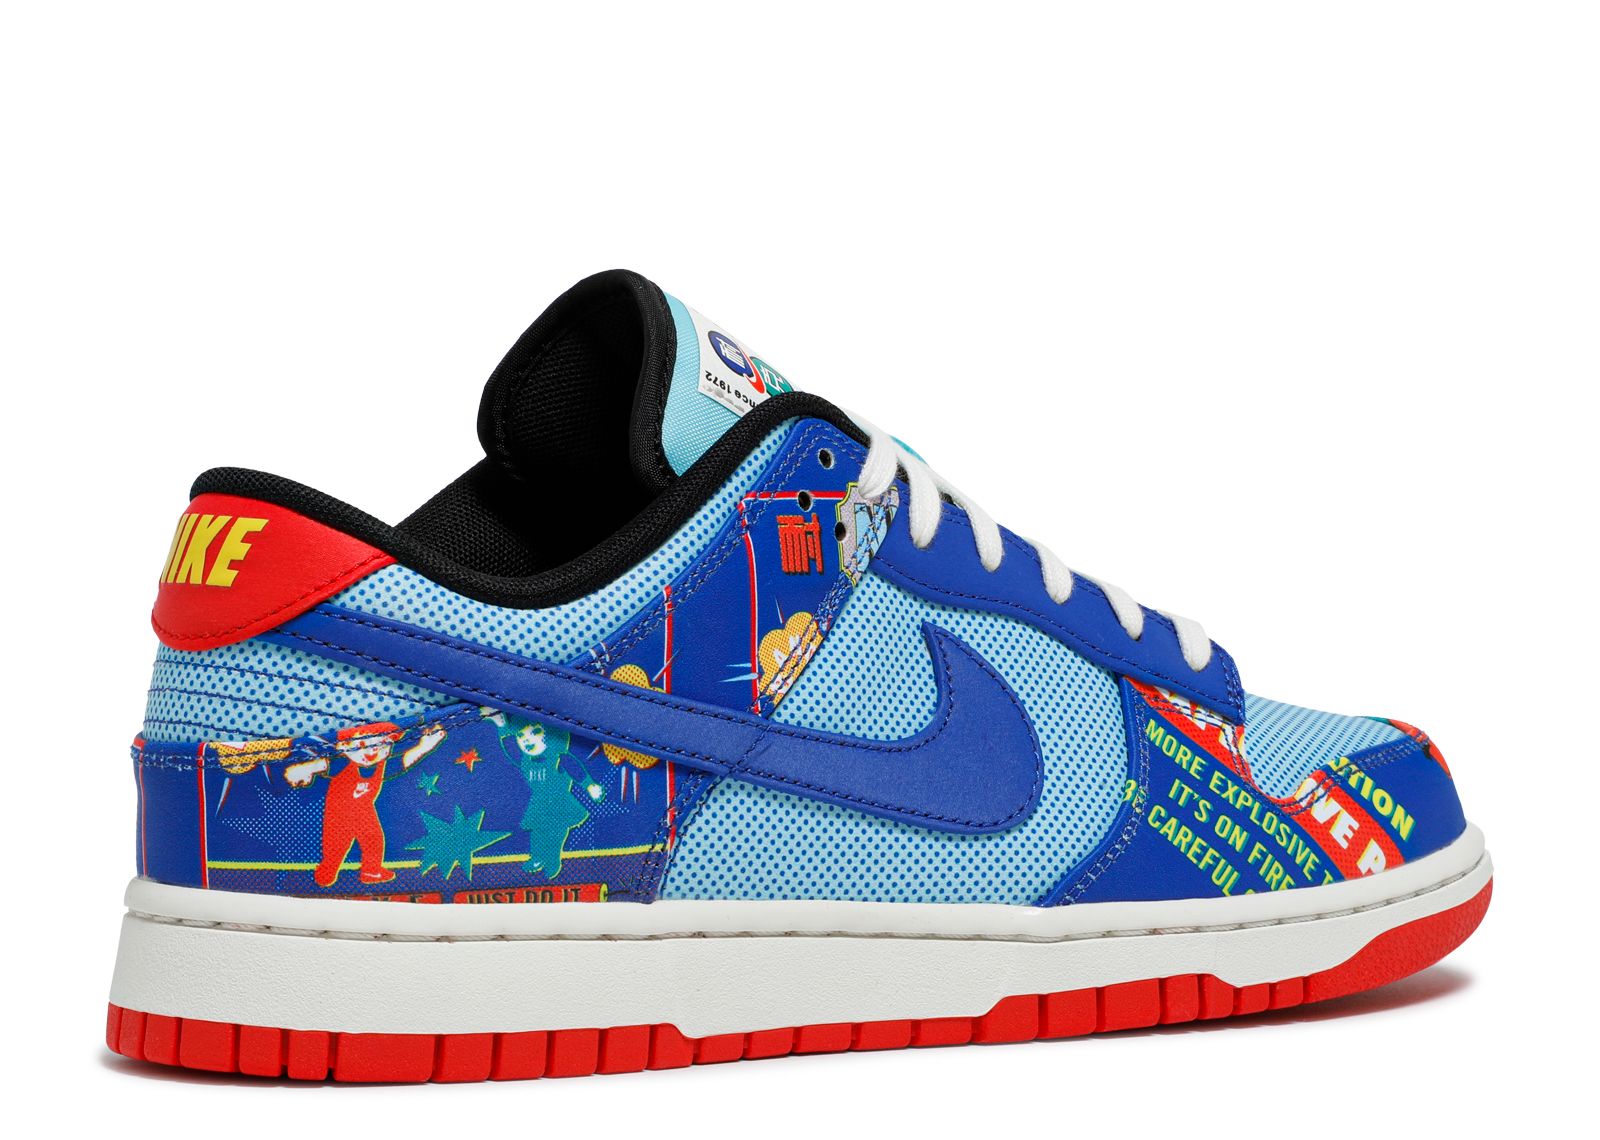 Dunk Low 'Chinese New Year Firecracker' - Nike - DD8477 446 